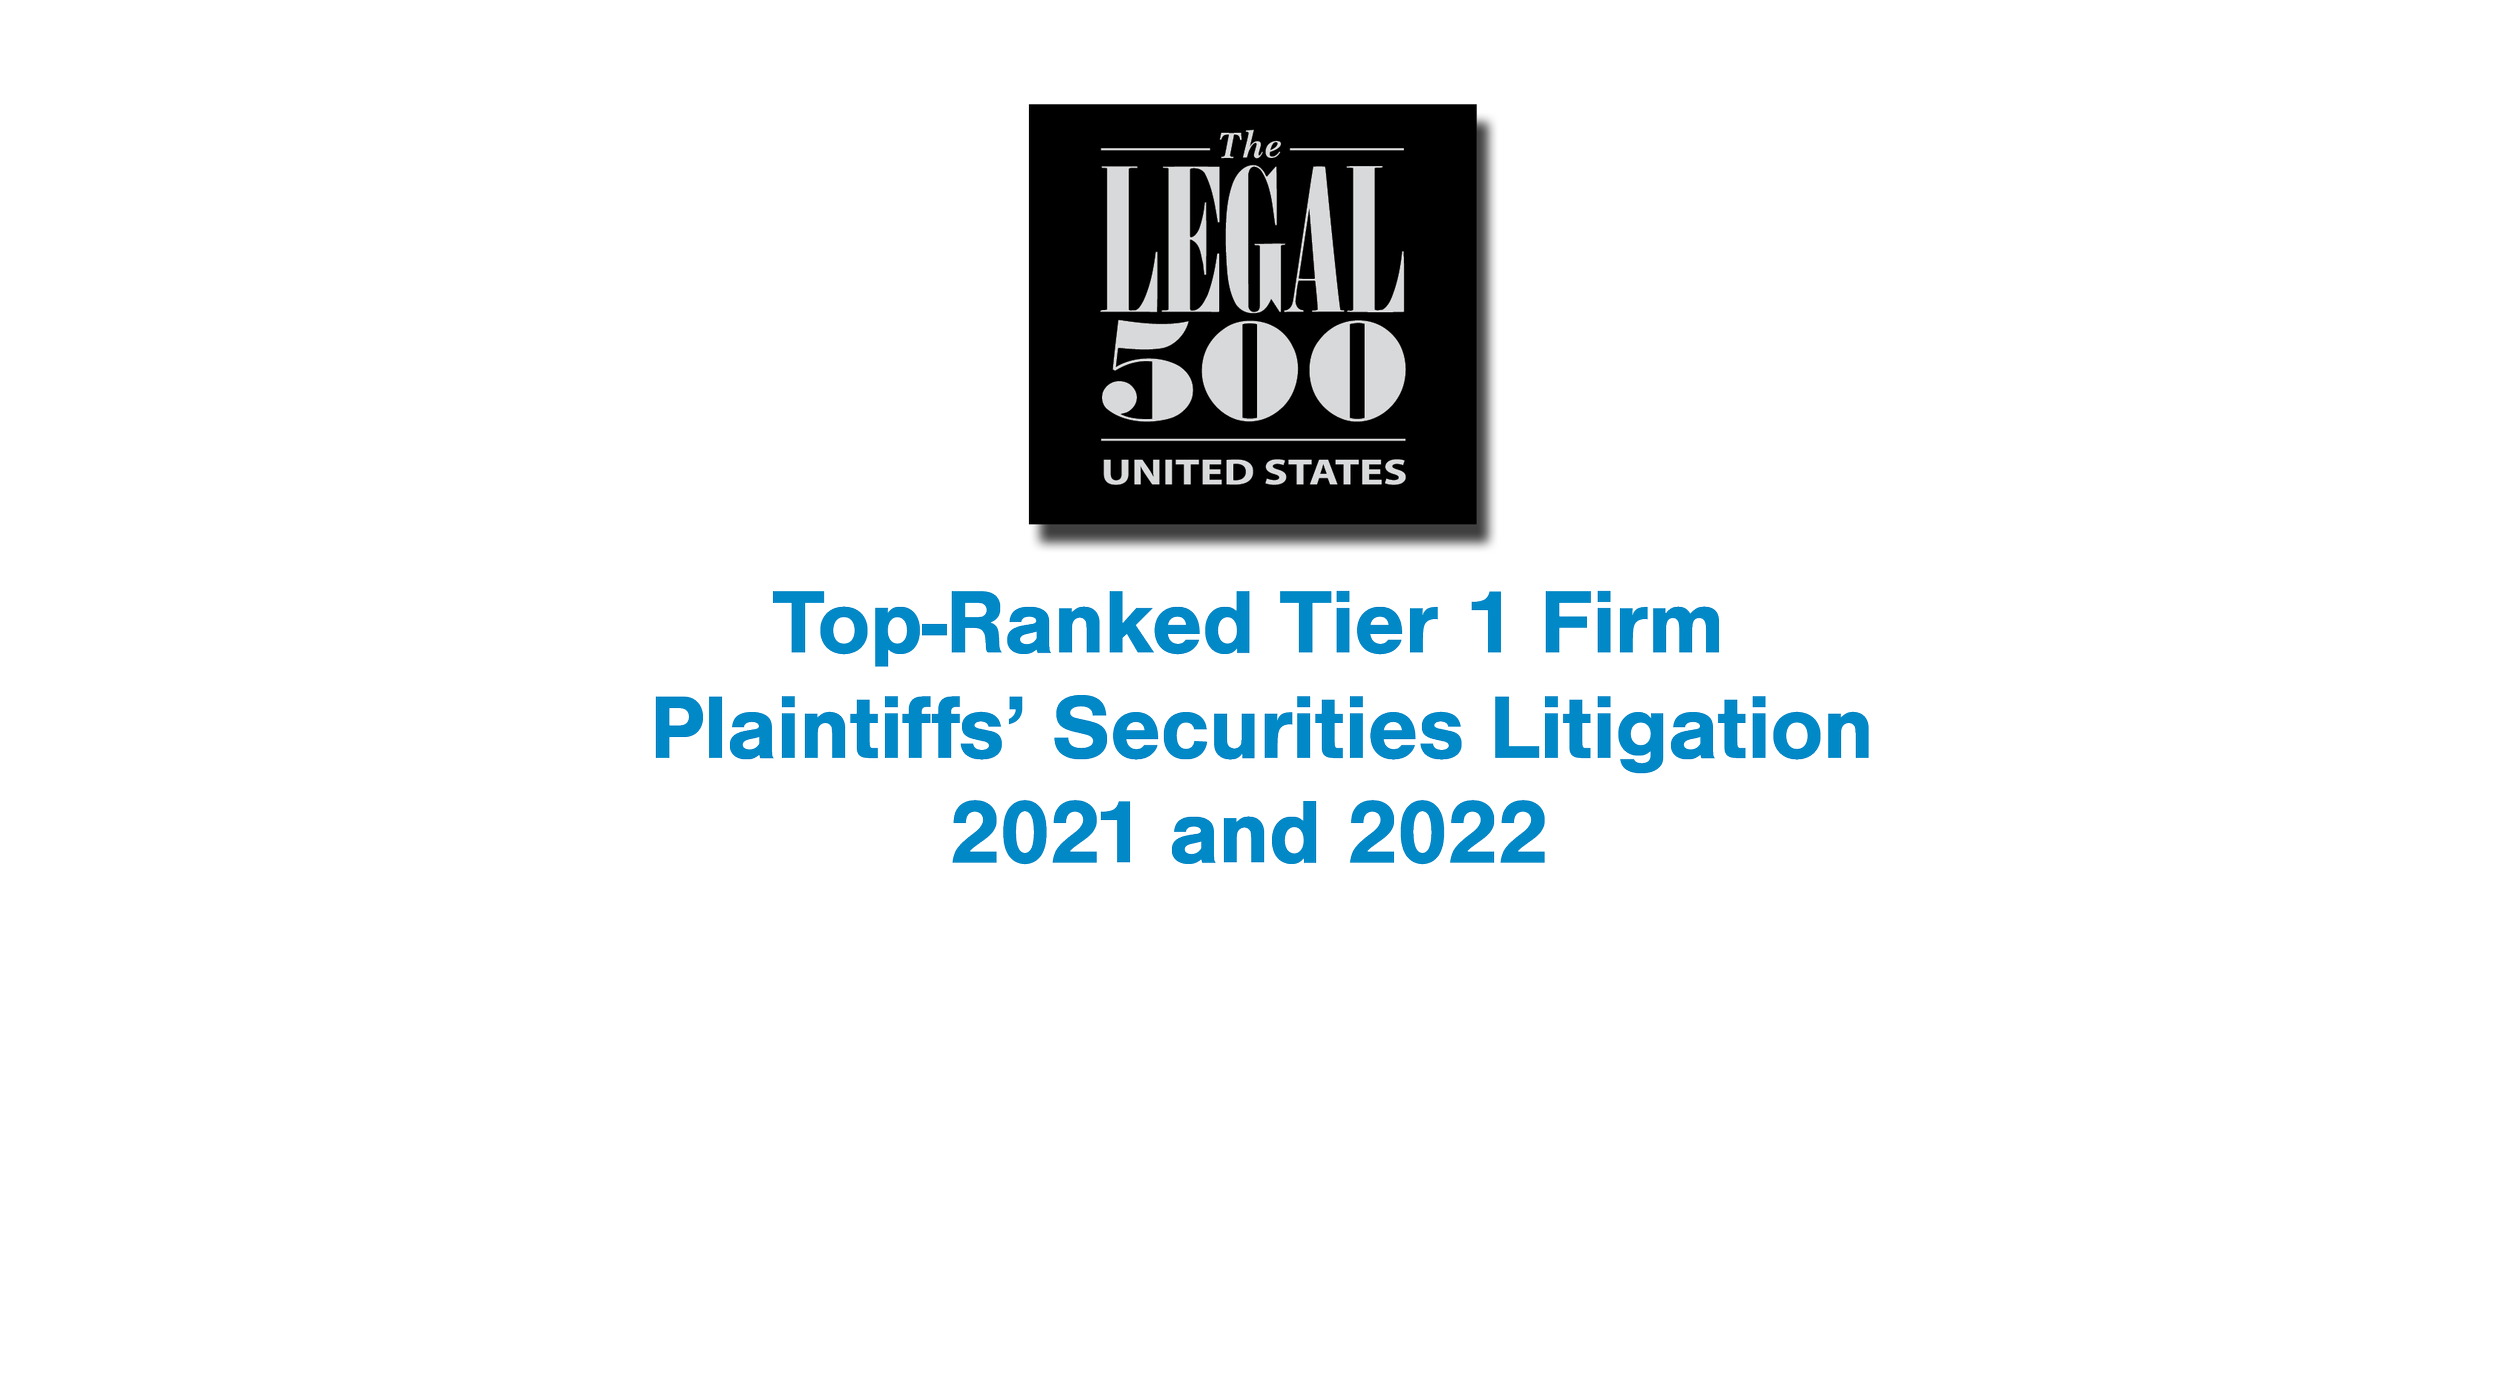 POM_SITE_2022_ACCOLADES_LEGAL 500_6.21.22.png